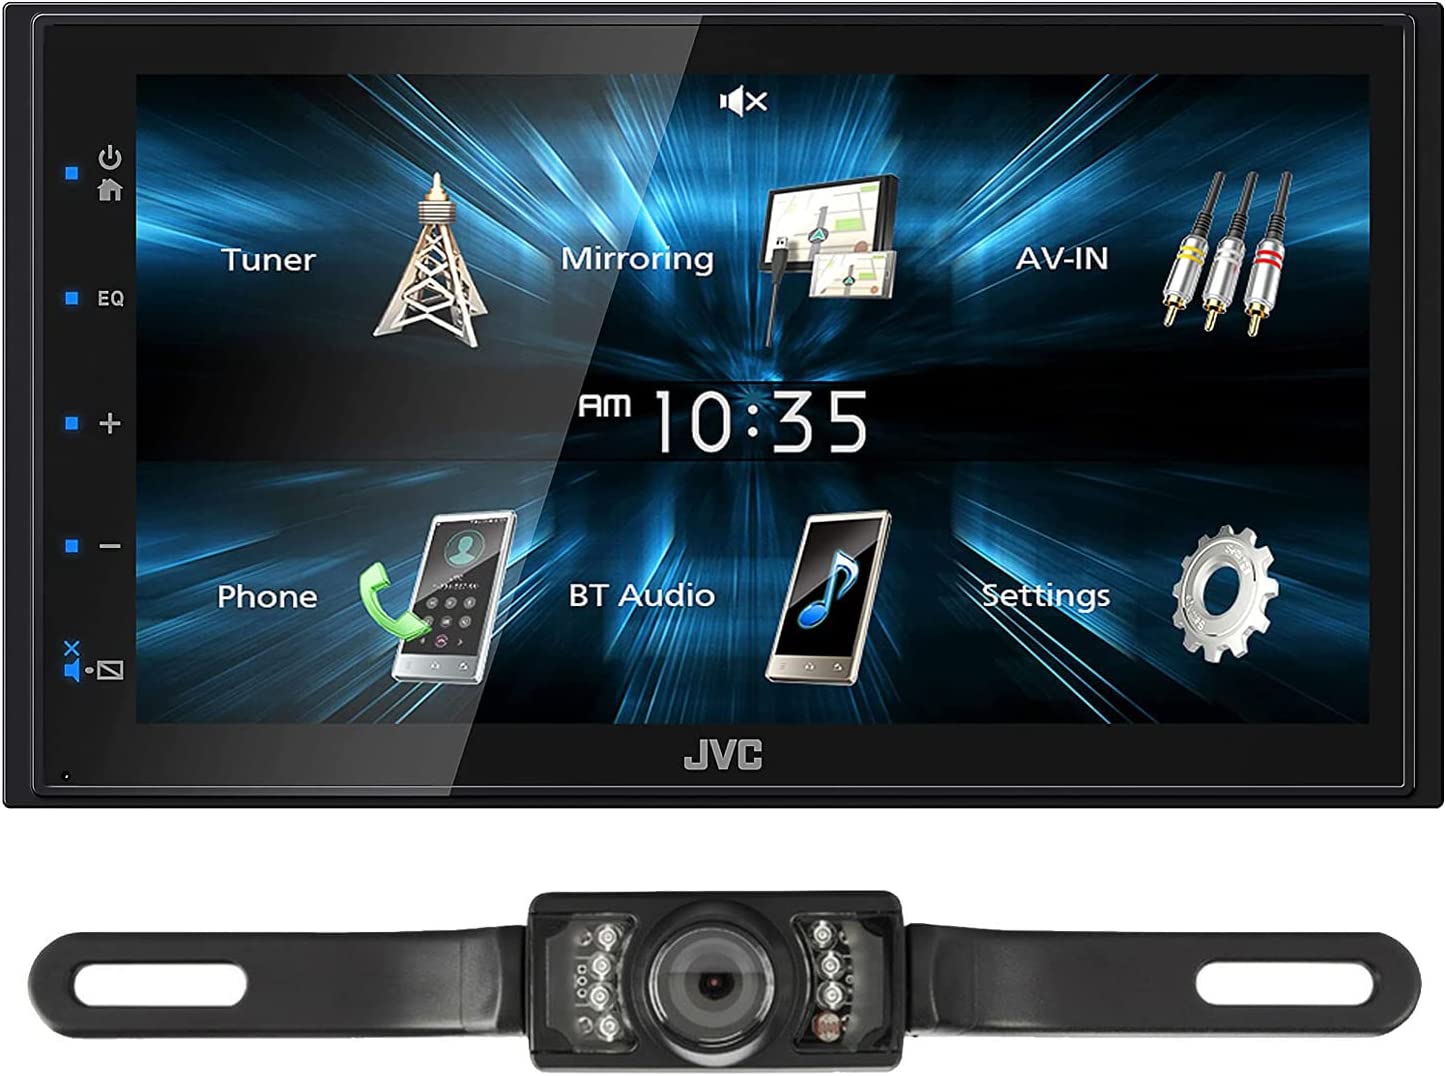 JVC KW-M150BT Bluetooth Car Stereo Receiver with USB Port 6.75" Display Radio MP3 Player Double DIN + Absolute CAM600 Camera